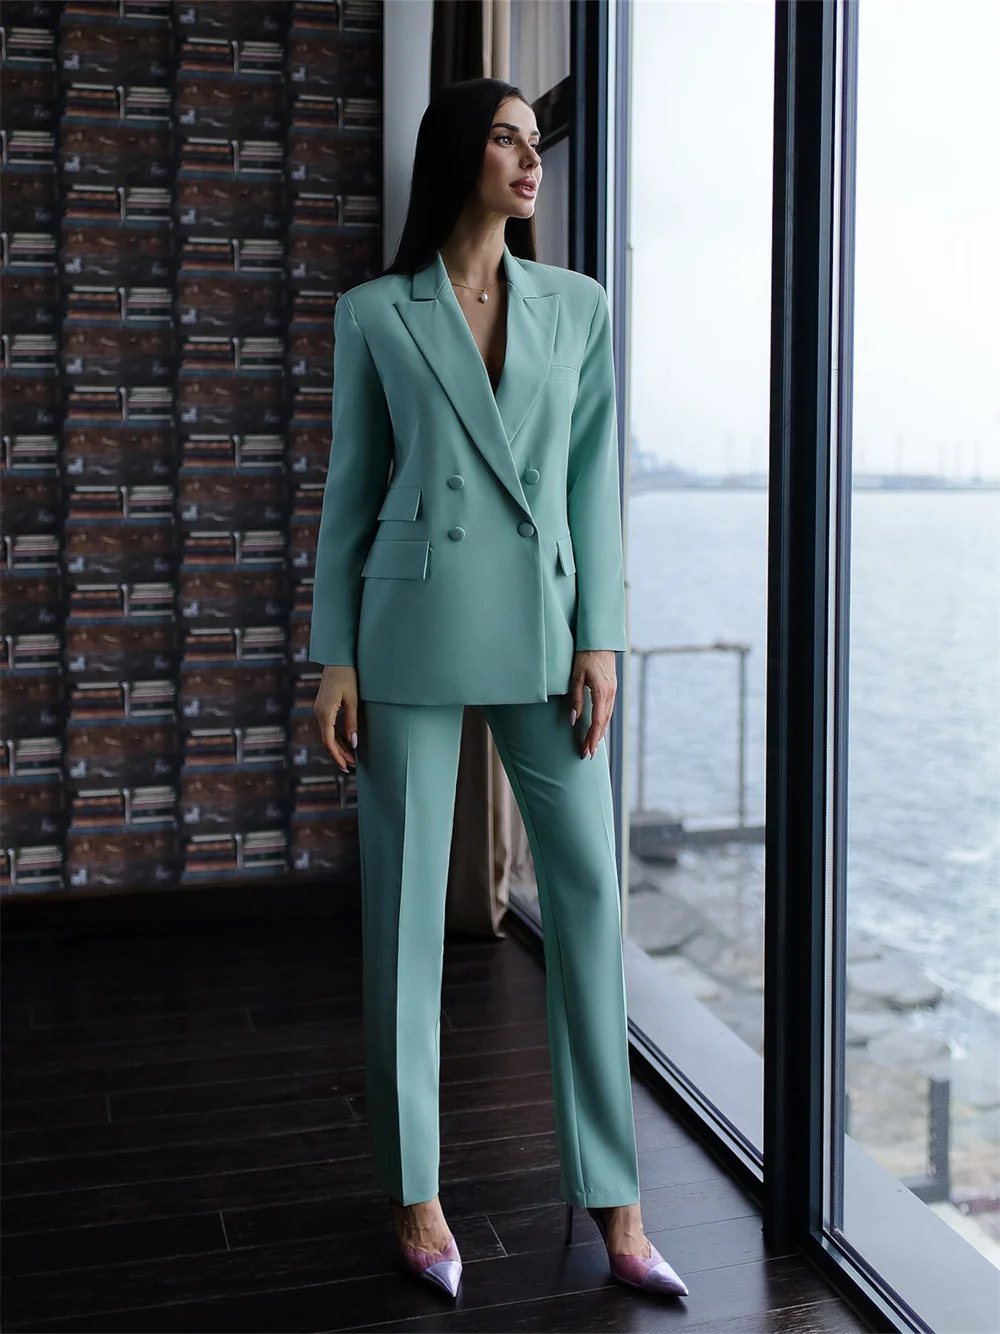 Classic Women Pant Suits Glamorous Double Breasted Business Suits Formal Wedding Tuxedo Blazer Customized Suits